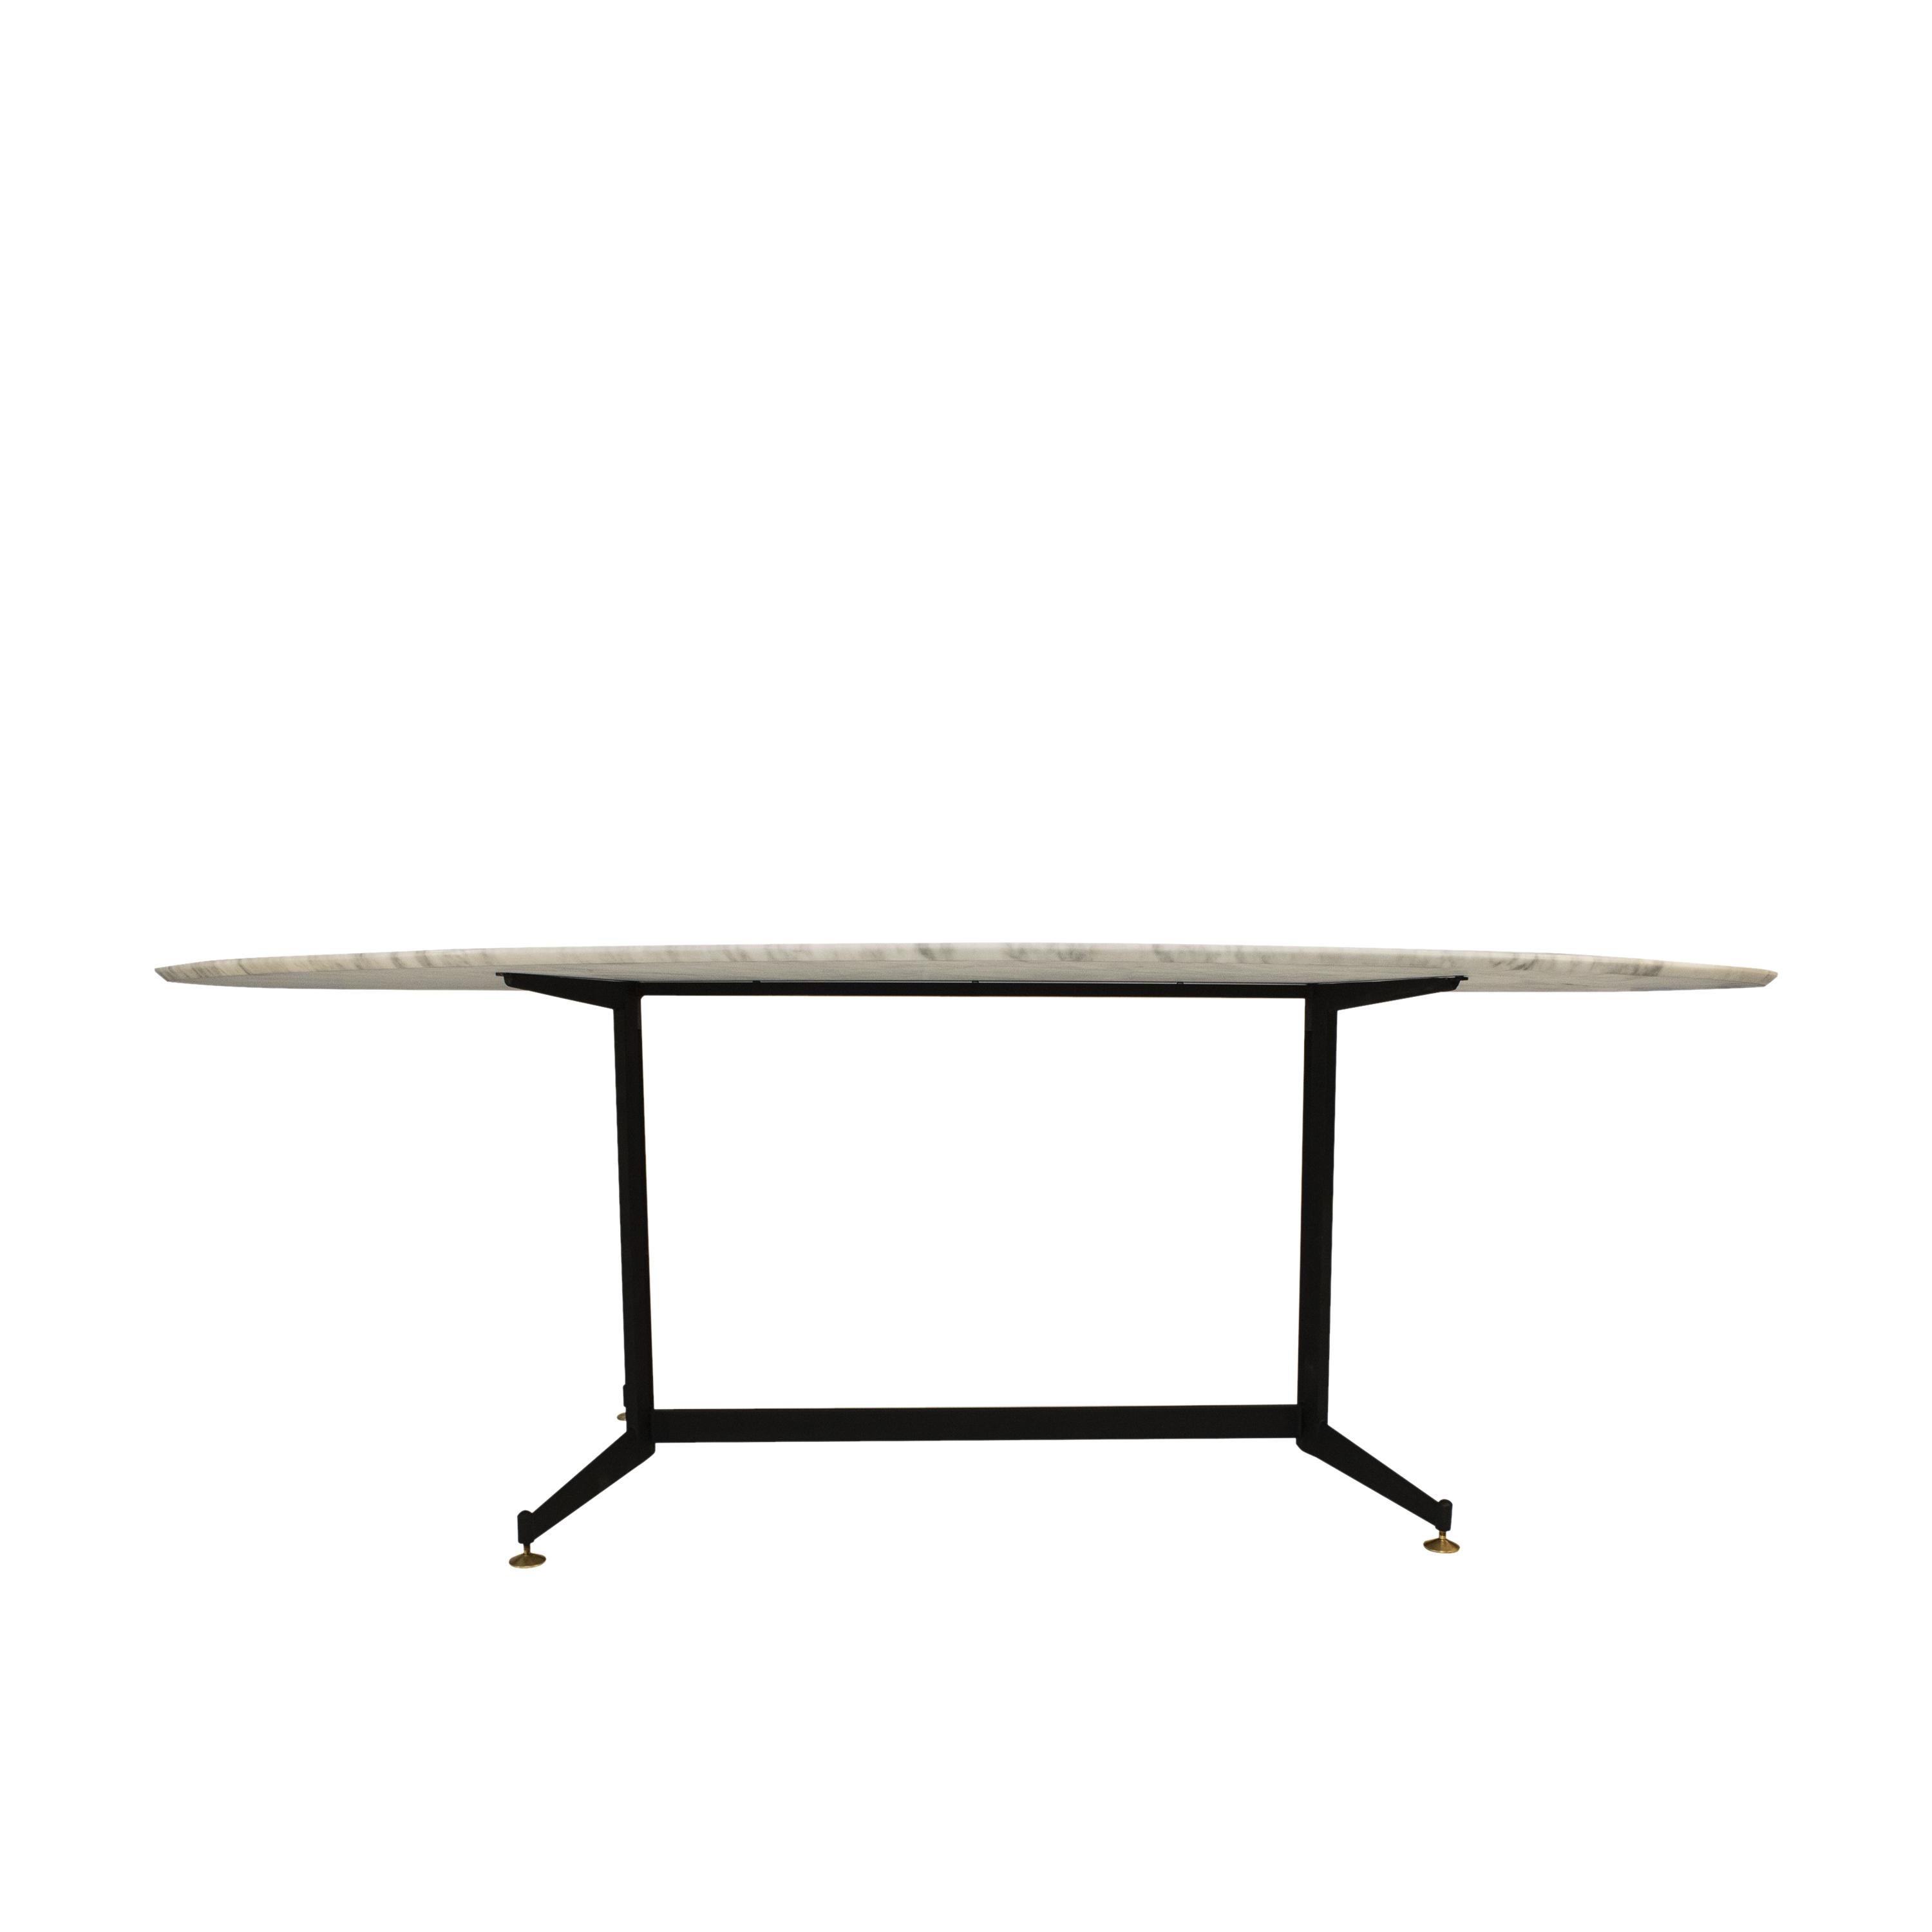 Italian Mid-Century Modern Carrara Marble Dining Table with Metallic Foot, Italy, 1950 For Sale